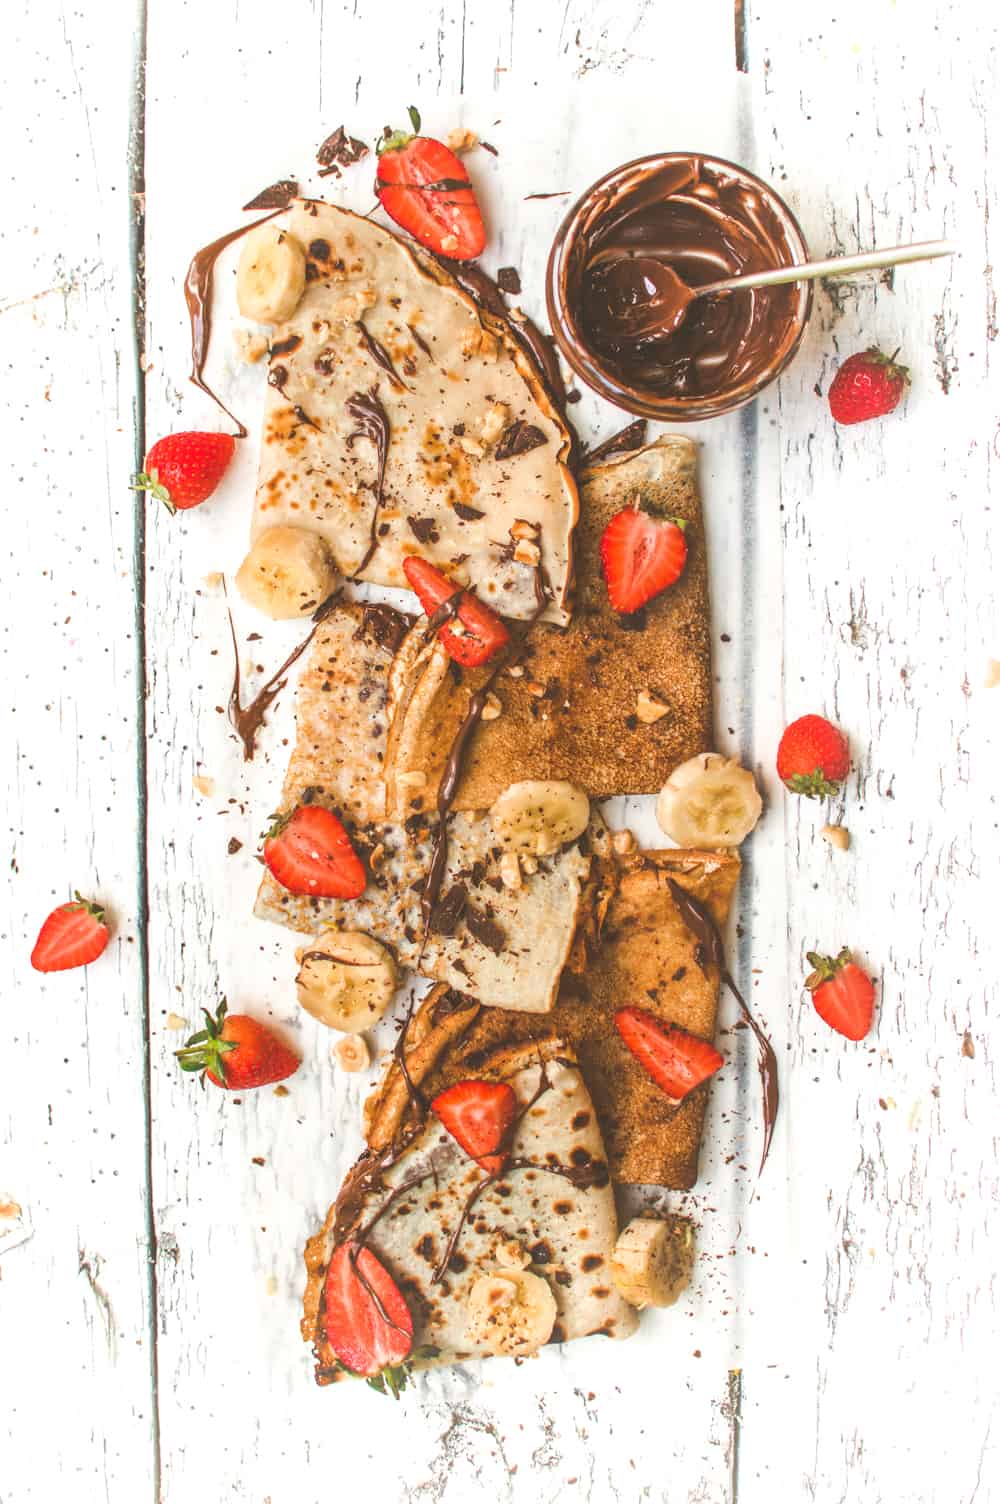 Vegan Crepes Filled with Nutella | Easy Vegan Dessert | World of Vegan | #crepes #vegan #nutella #dessert #plantbased #chocolate